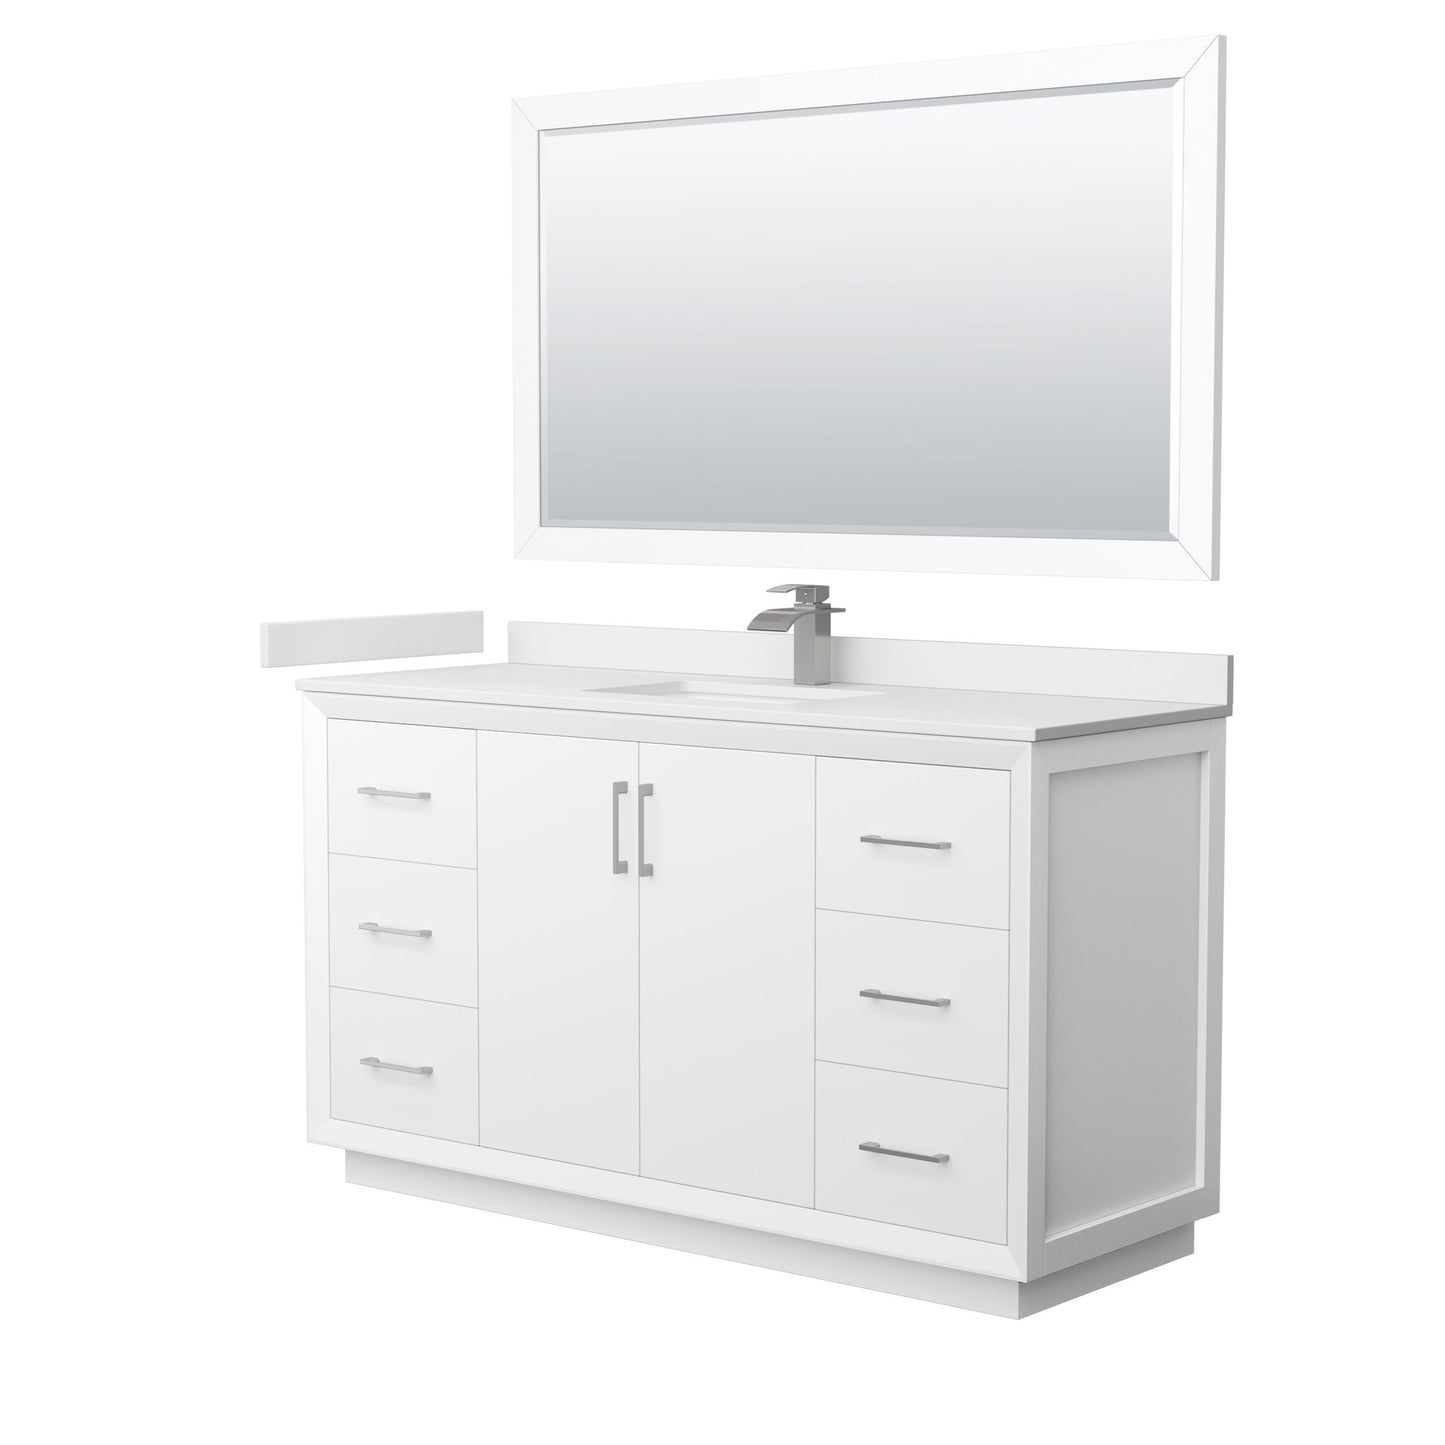 Wyndham Collection Strada 60" Single Bathroom Vanity in White, White Cultured Marble Countertop, Undermount Square Sink, Brushed Nickel Trim, 58" Mirror